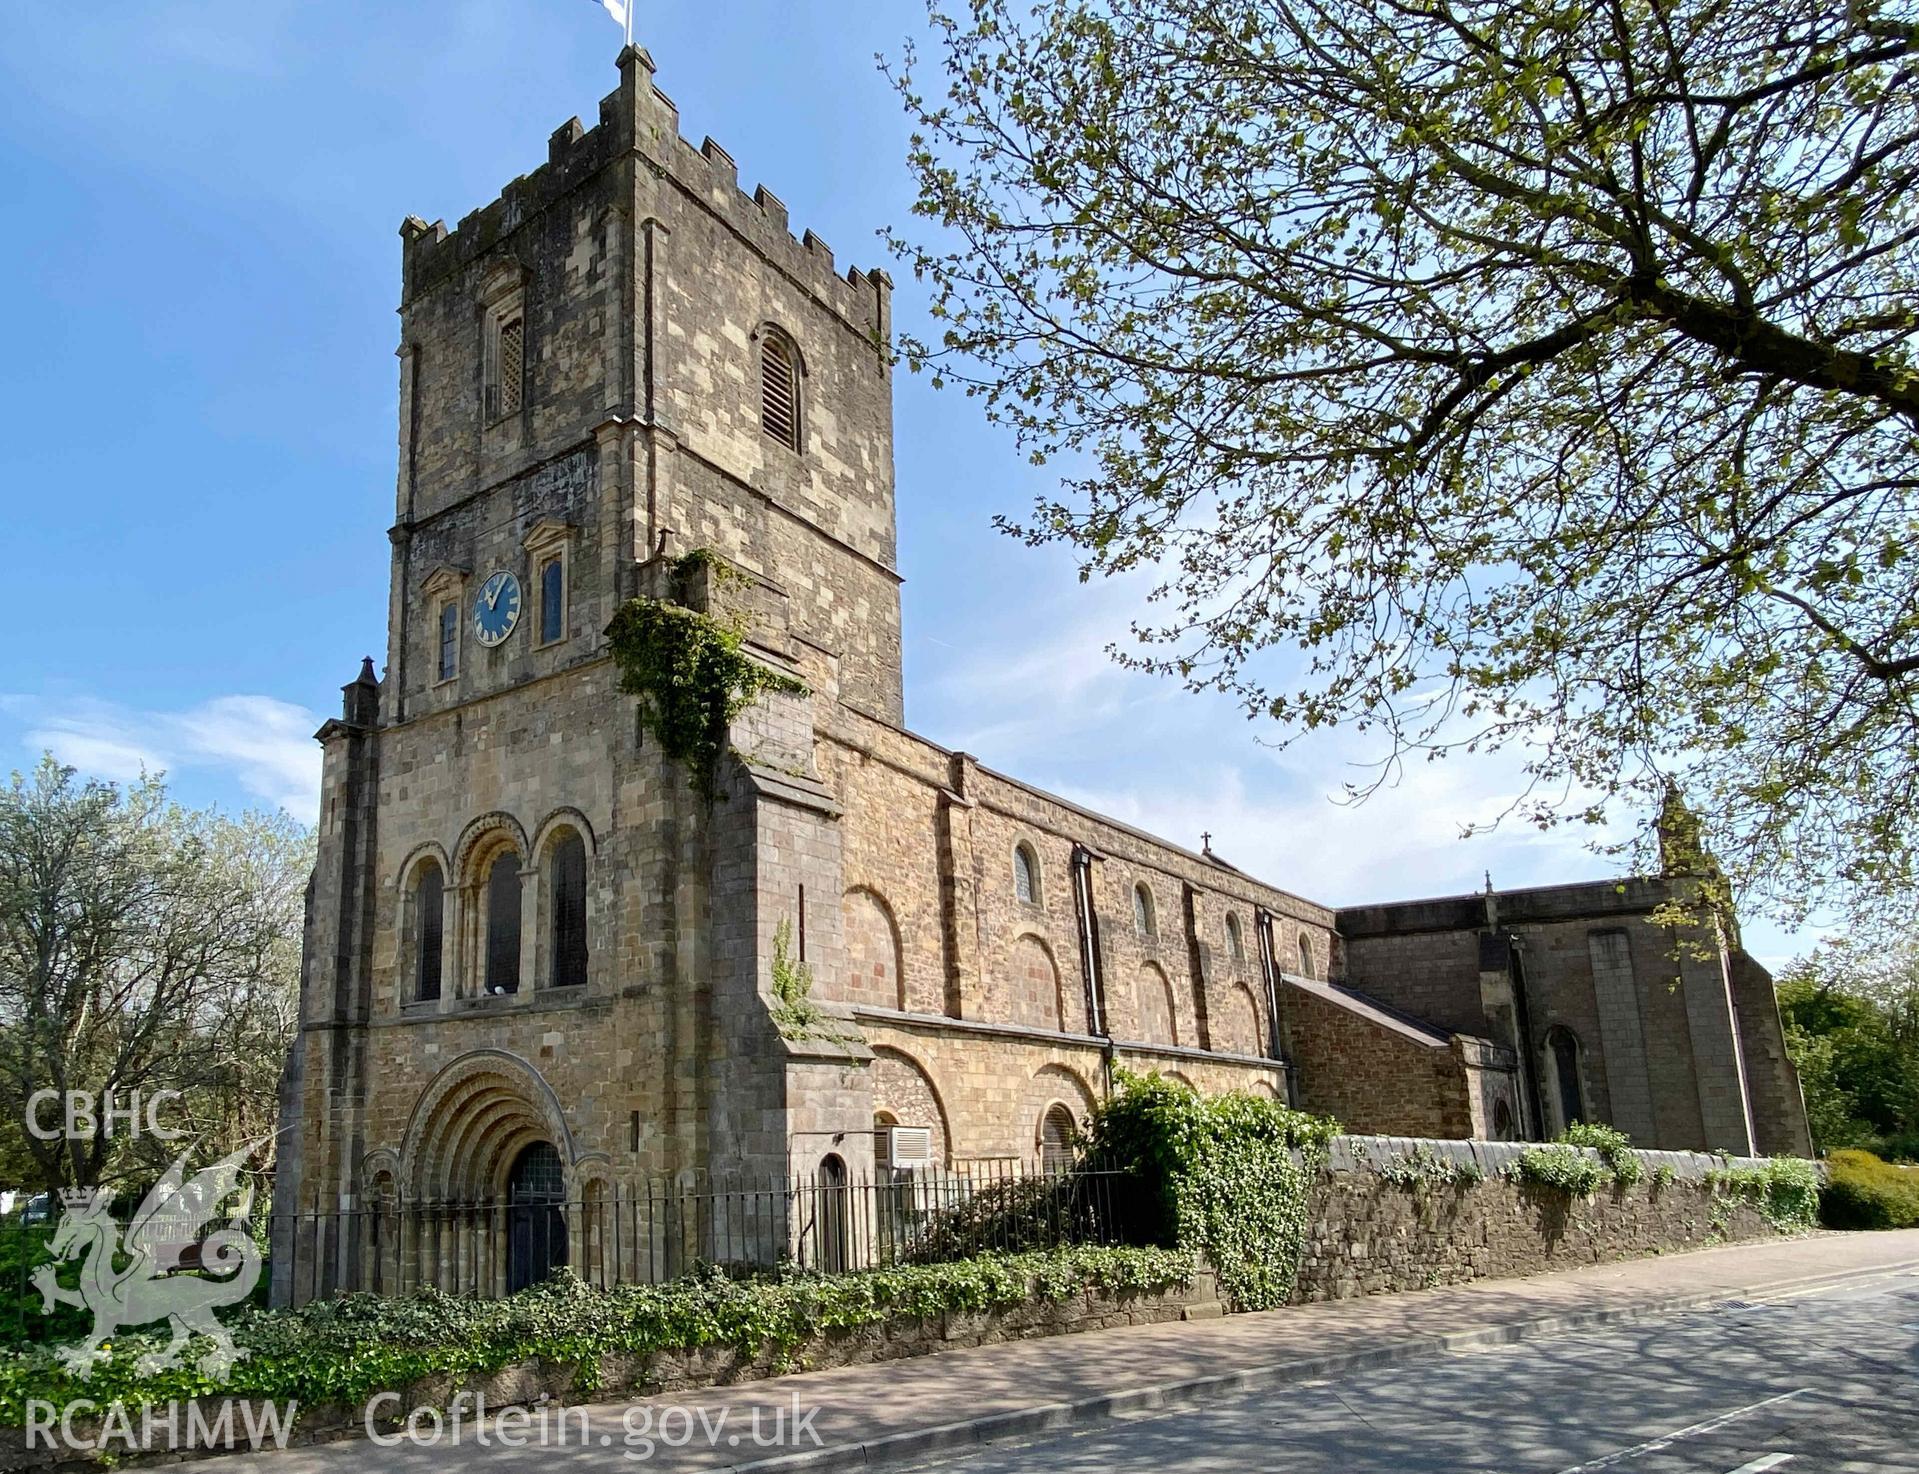 Digital photograph of St Mary's Church, Chepstow, produced by Paul Davis in 2023